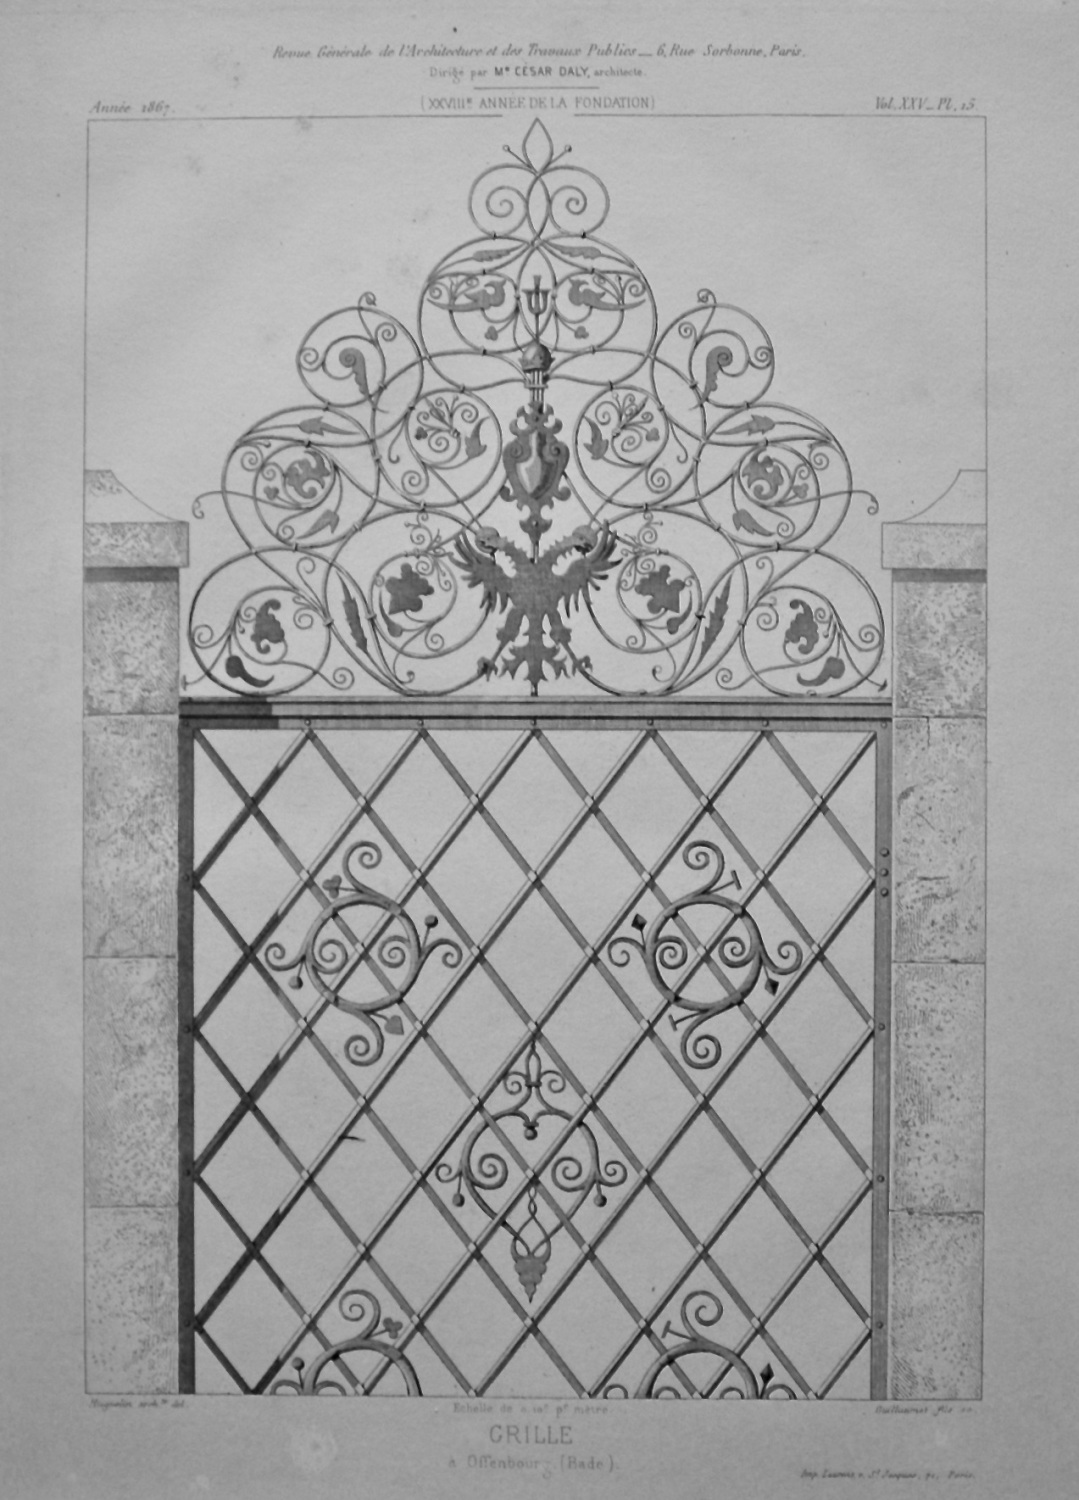 Grille, a Offenbourg. (Bade). 1867.